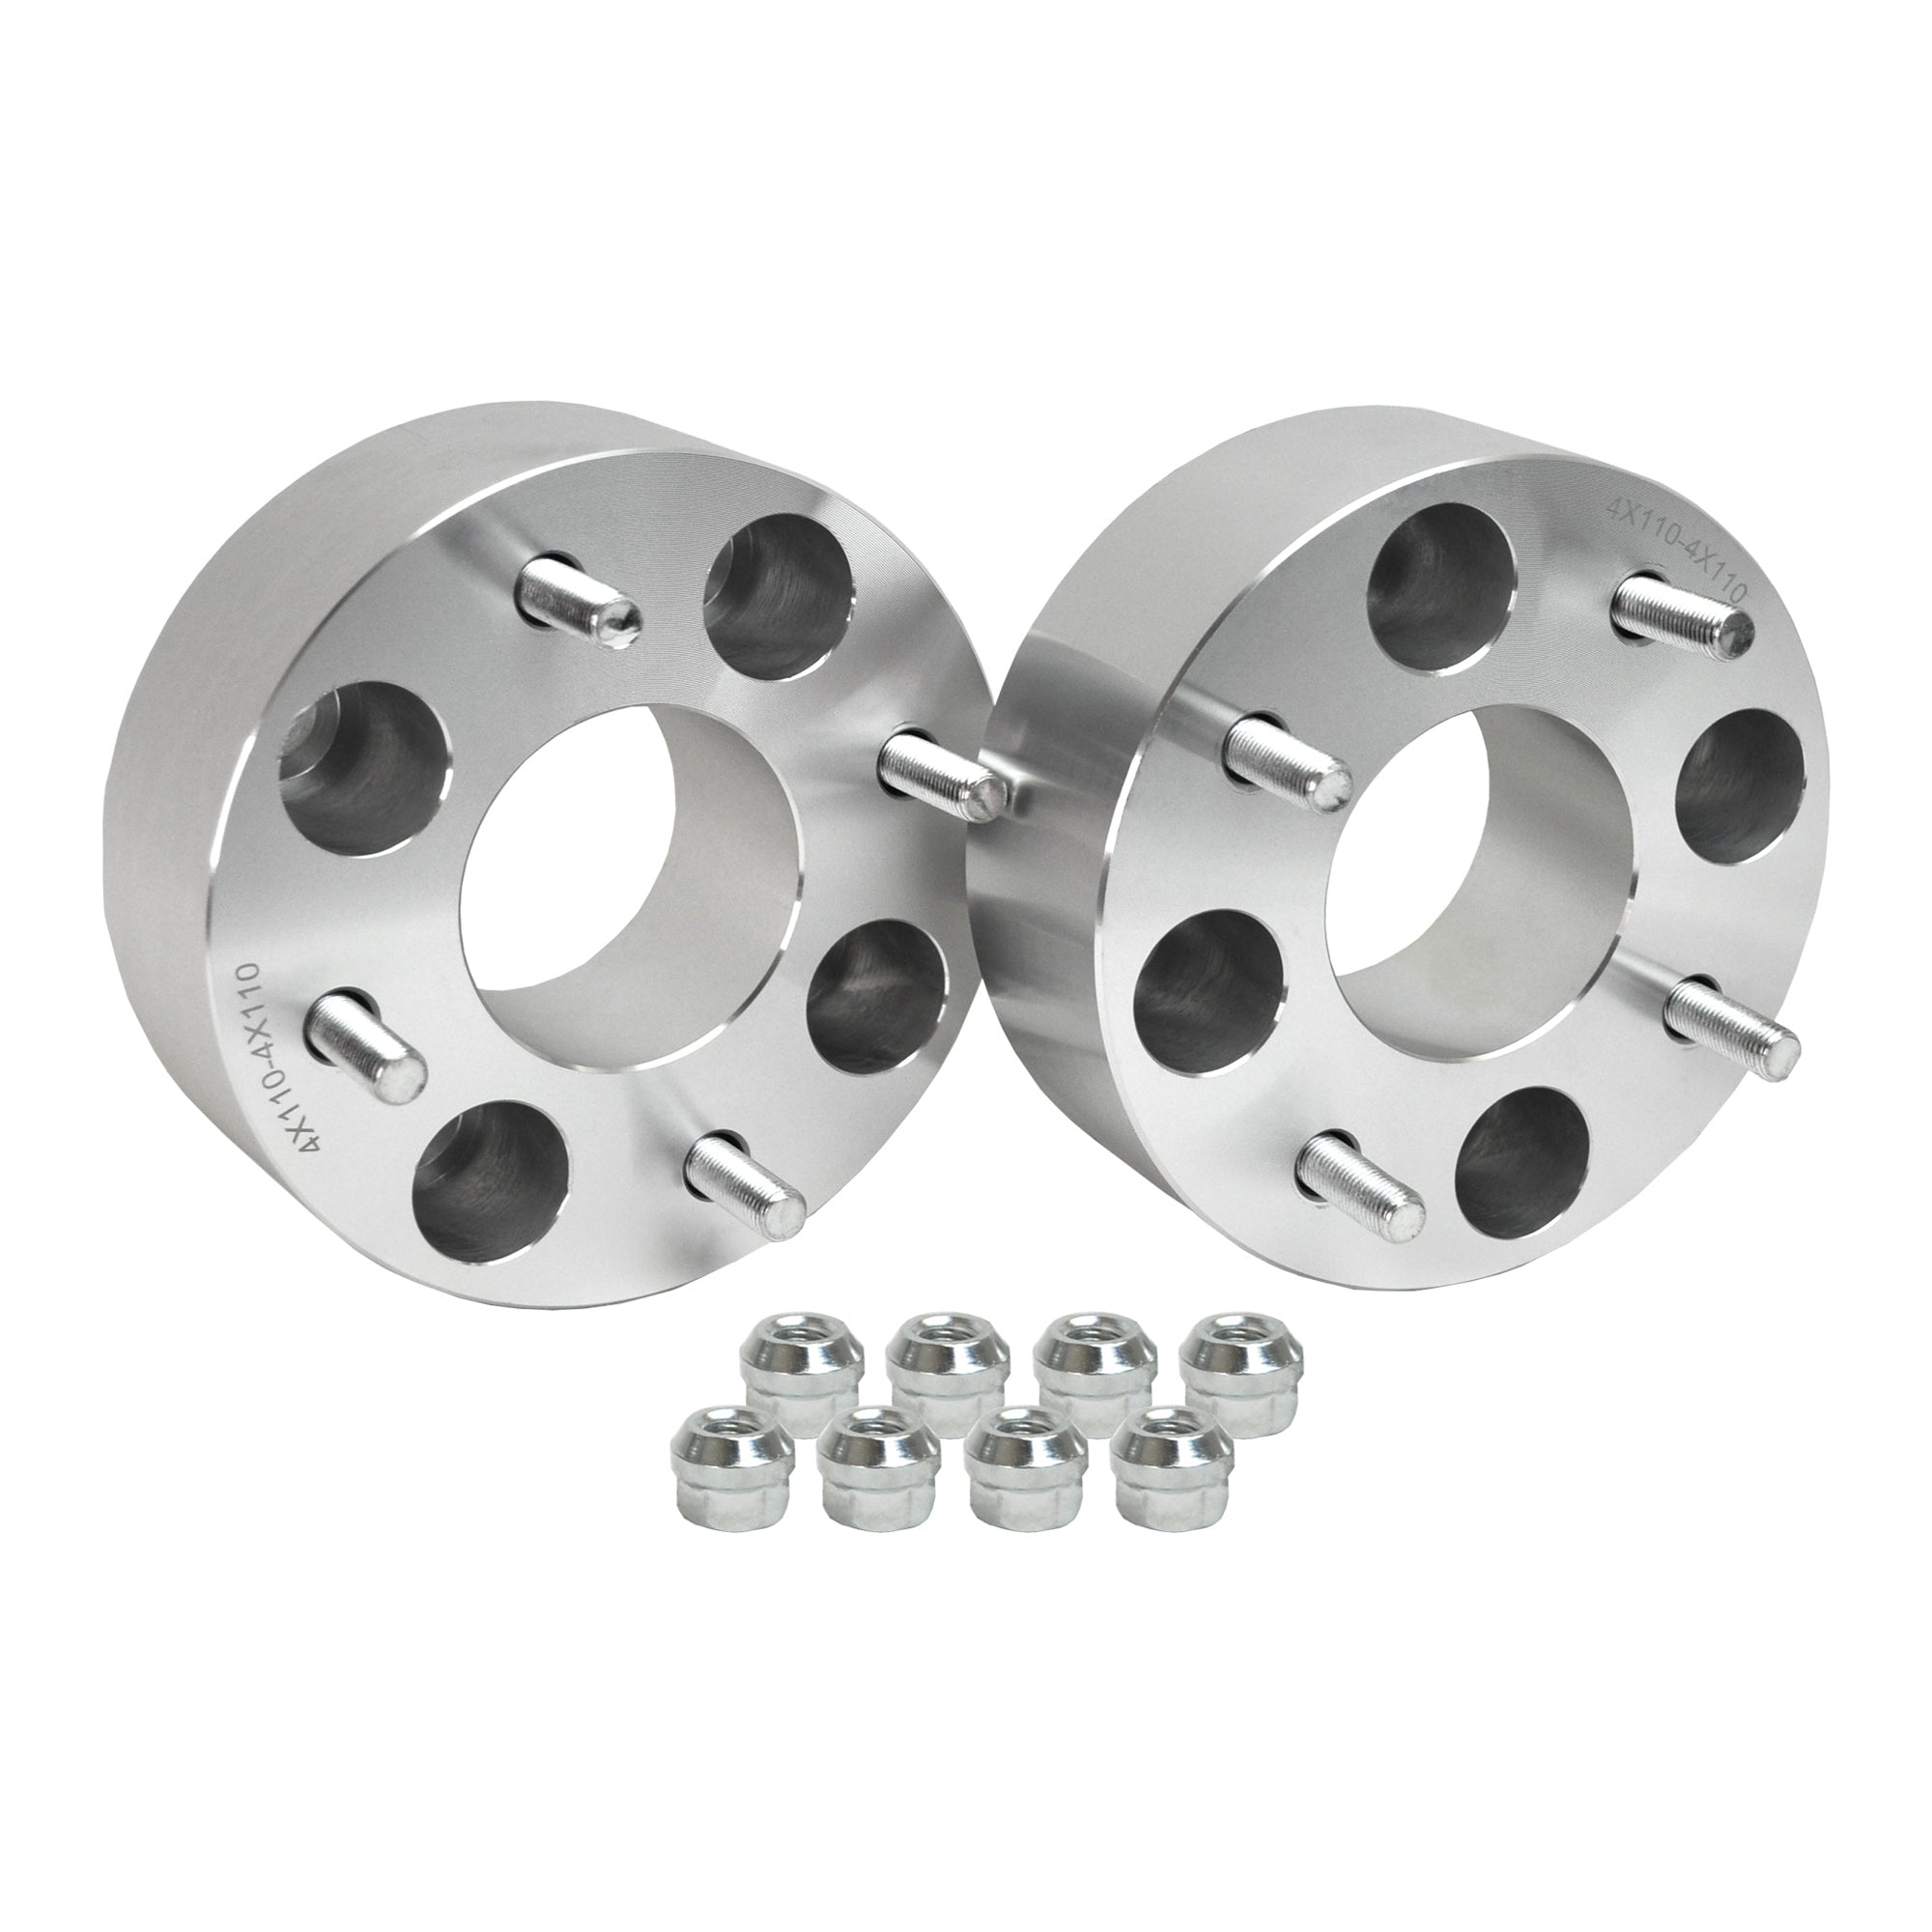 Wheel Spacer for Can Am Outlander 400 Max 